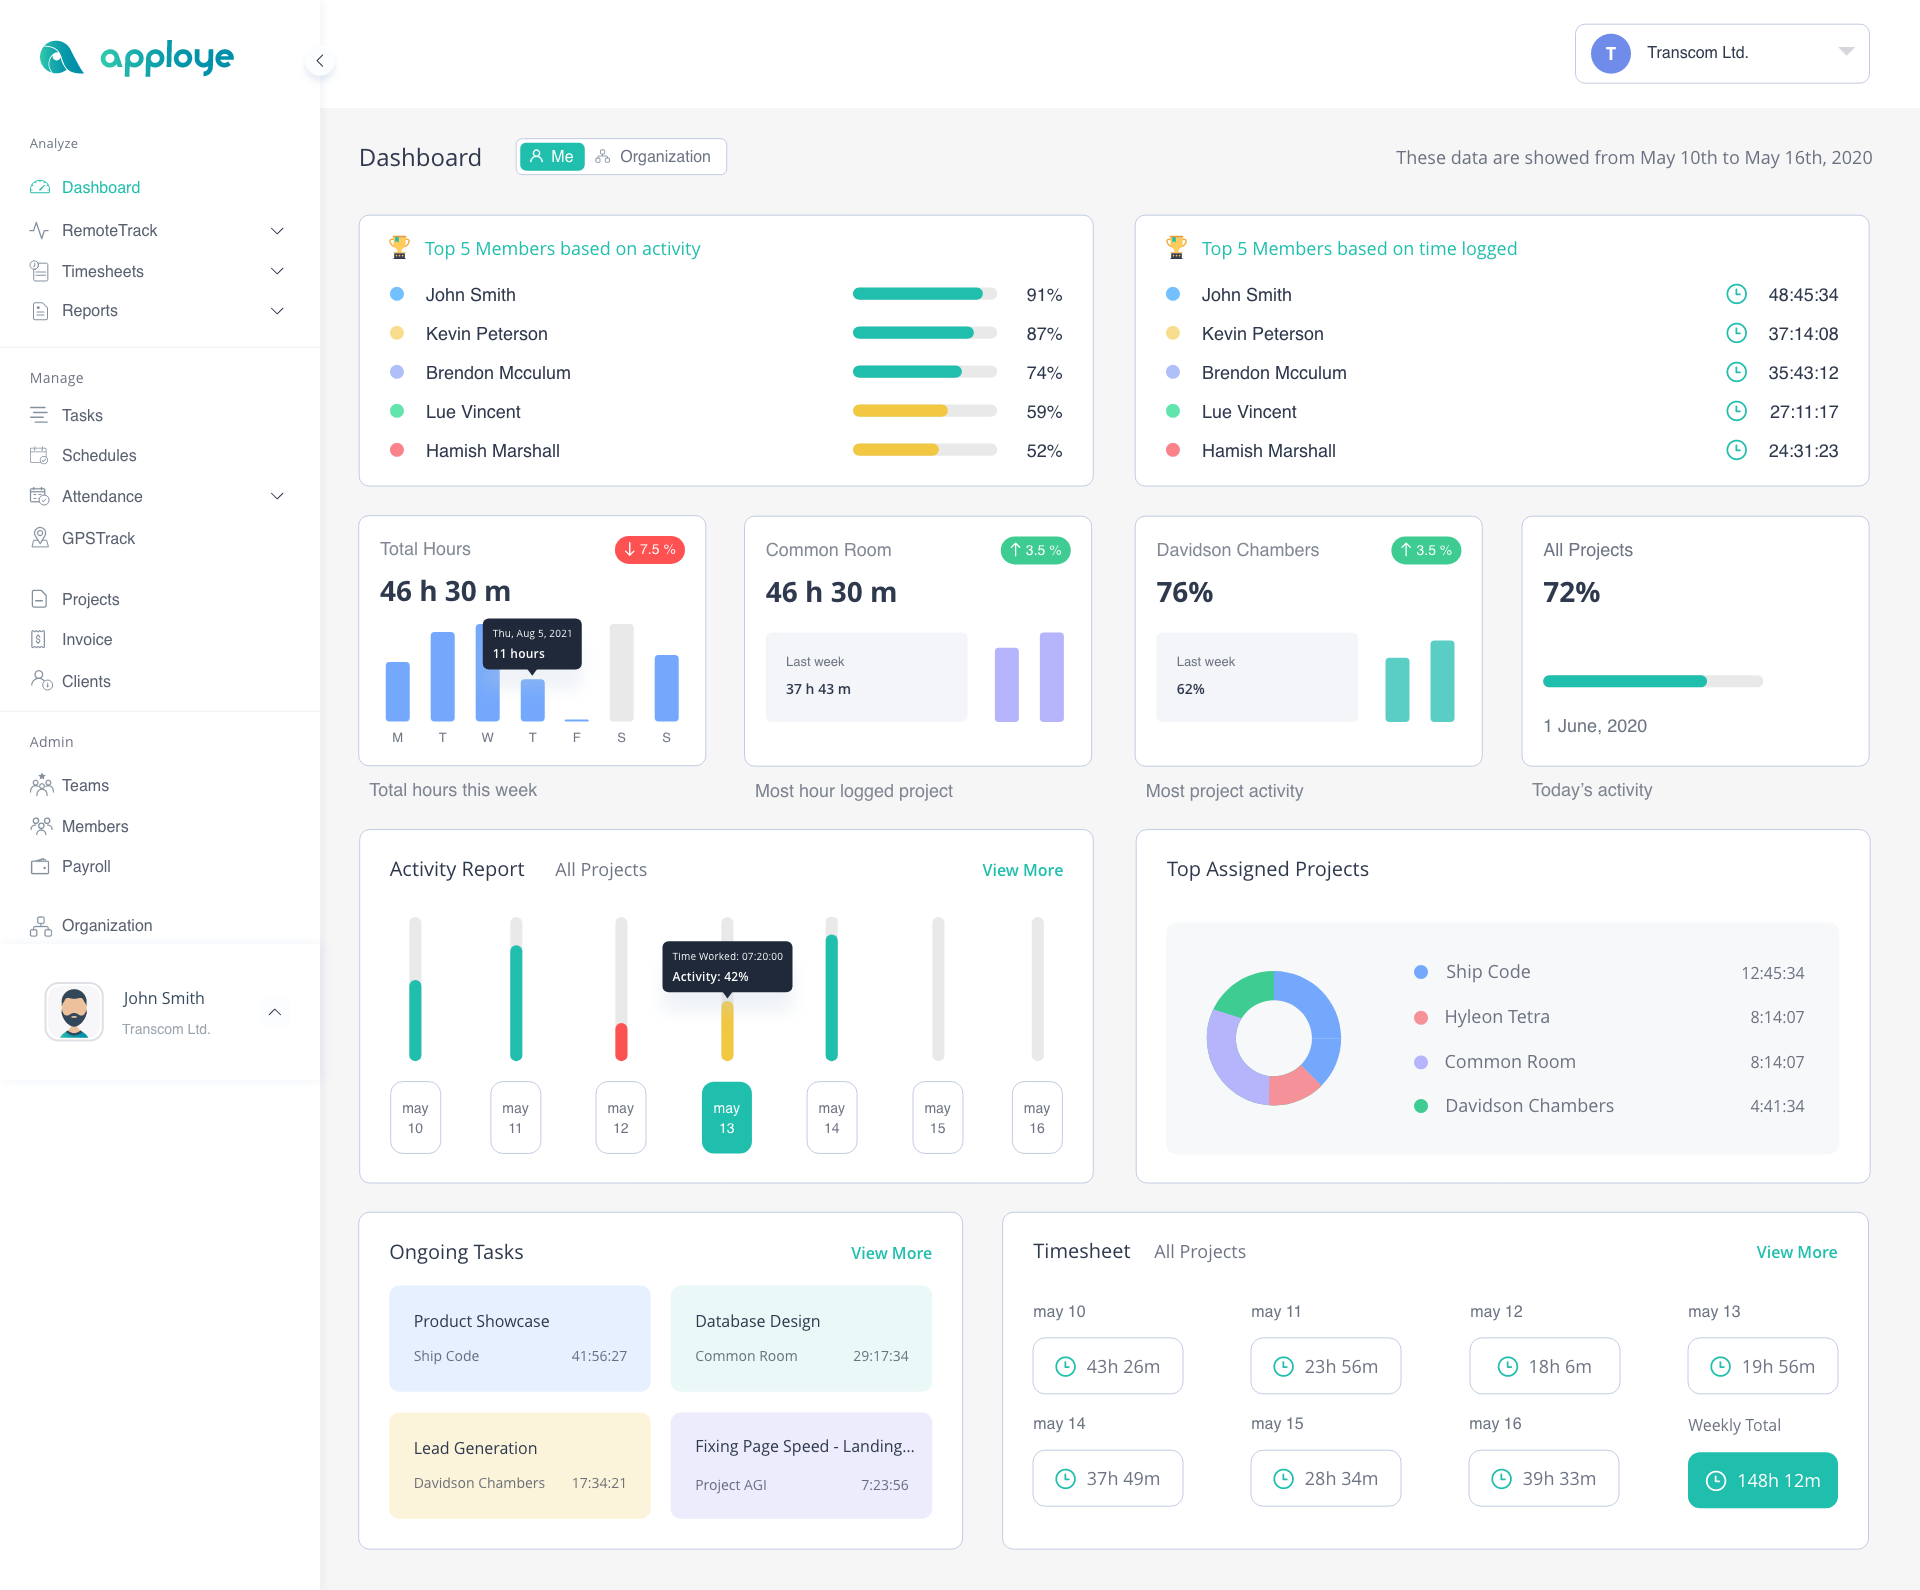 Apploye, a time management tool for remote workers